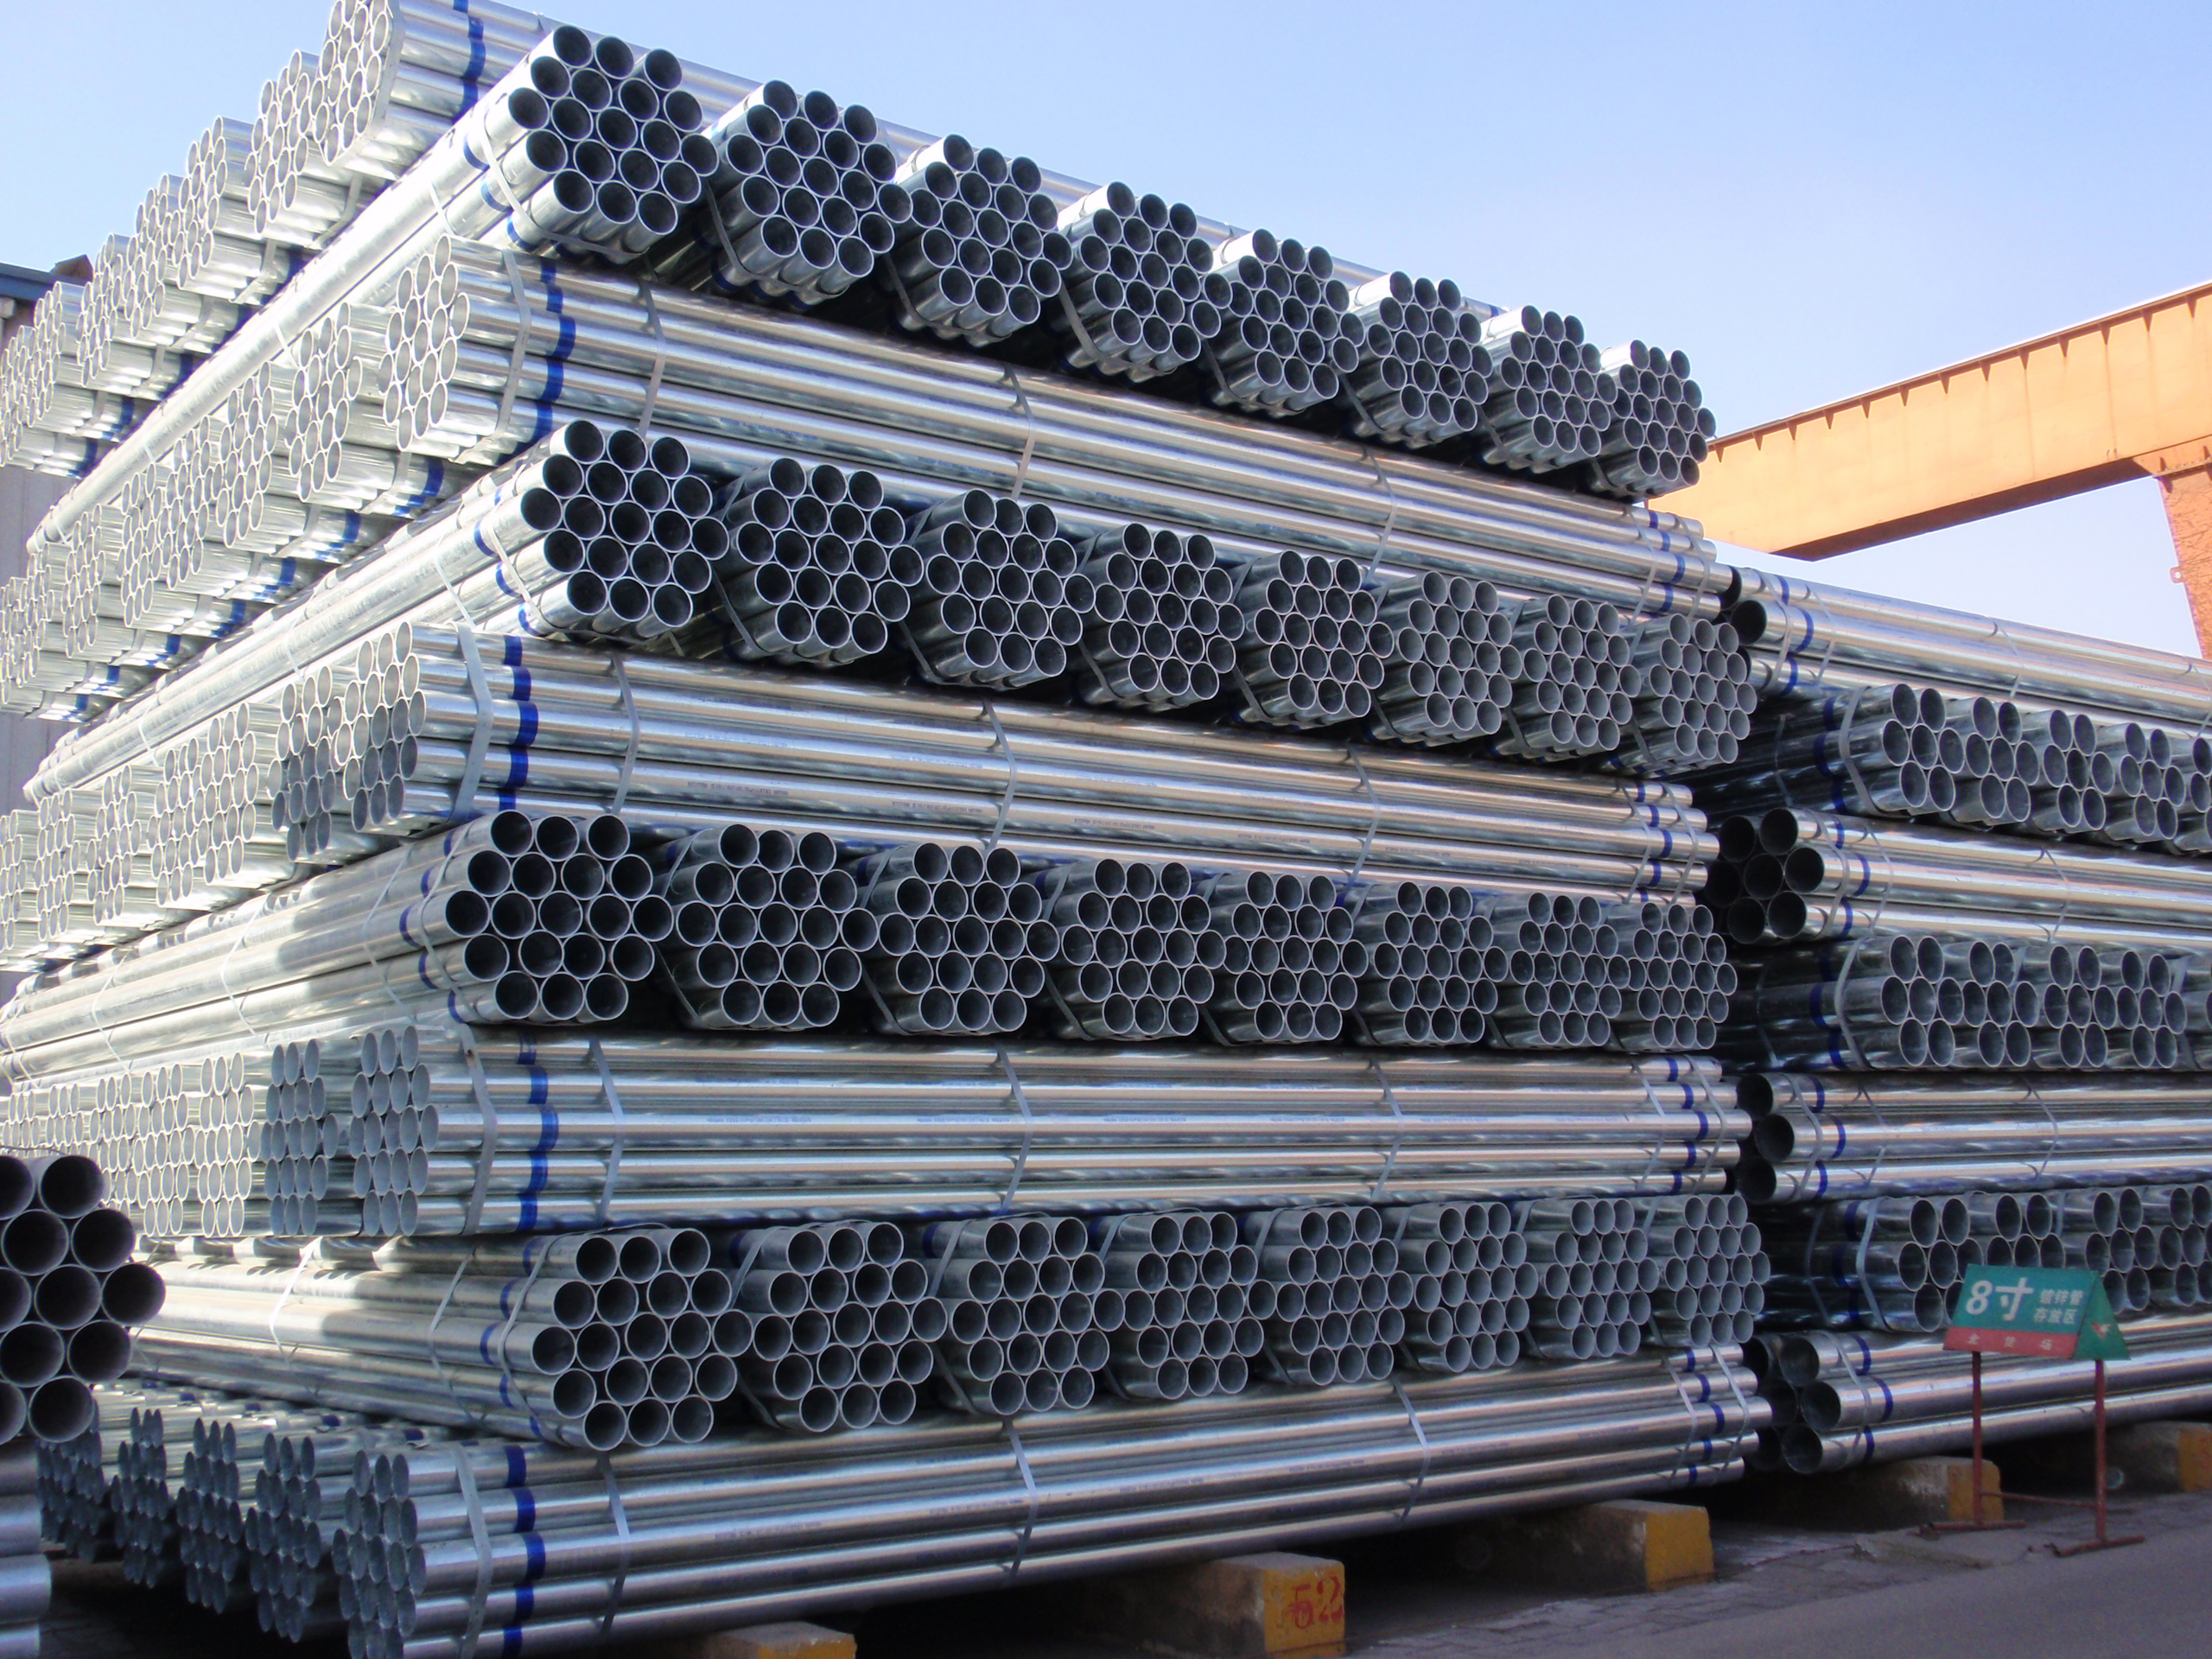 One of Hottest for Cfrp Carbon Fiber Tube - BS1387 Class B Galvanized Steel Pipe – Youfa